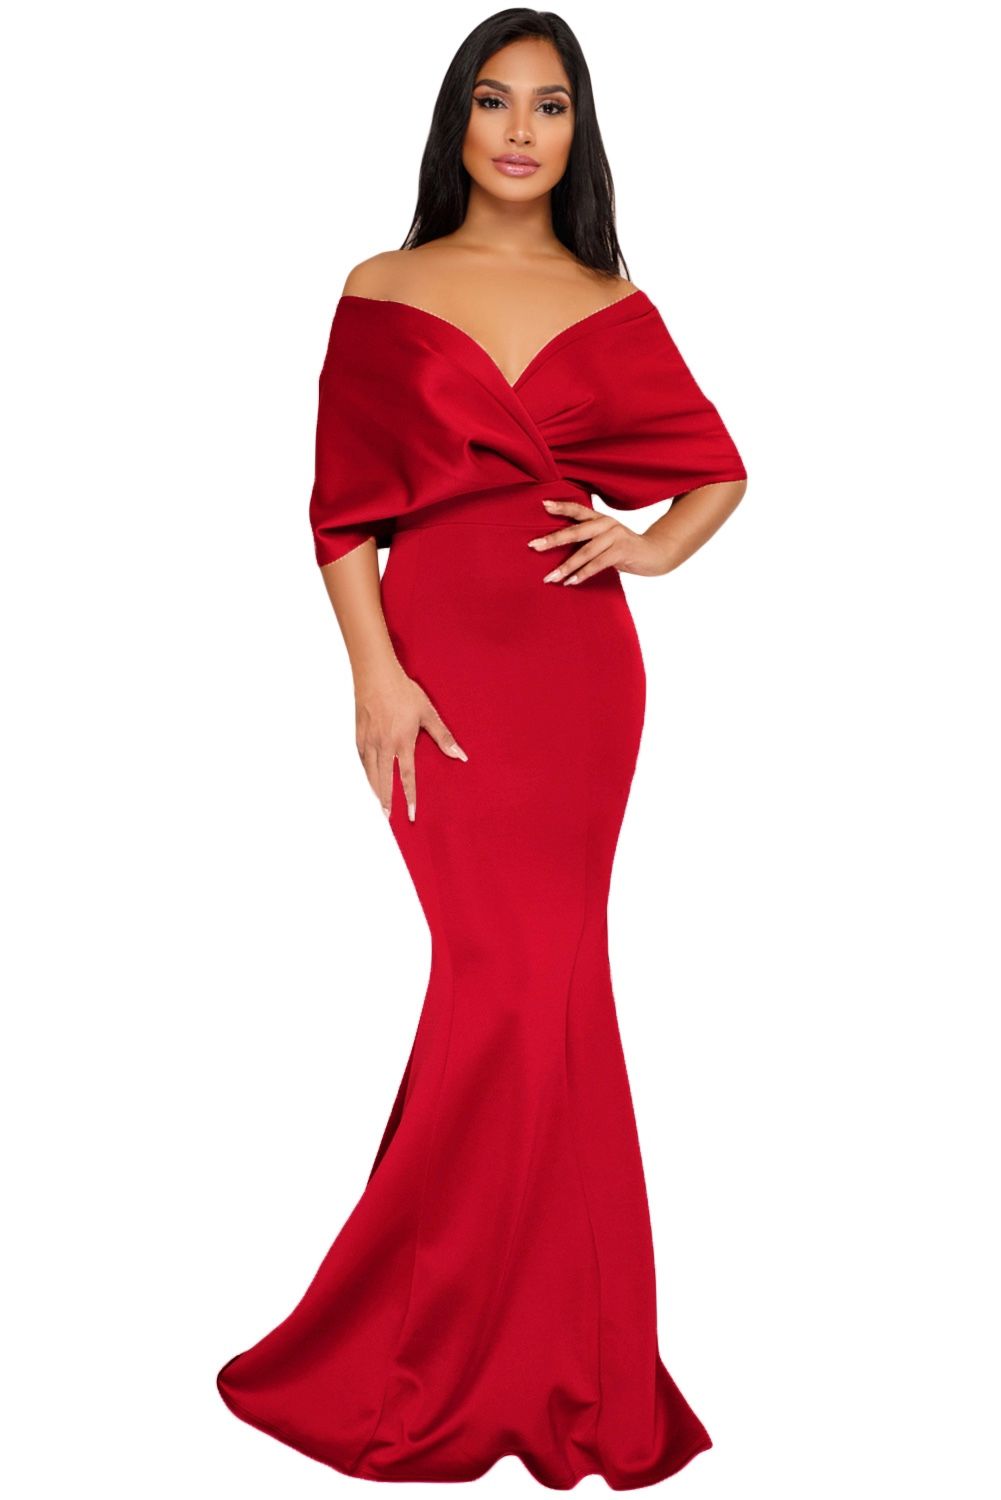 Red Off The Shoulder Mermaid Maxi Dress Size 4-6 and Size 8-10